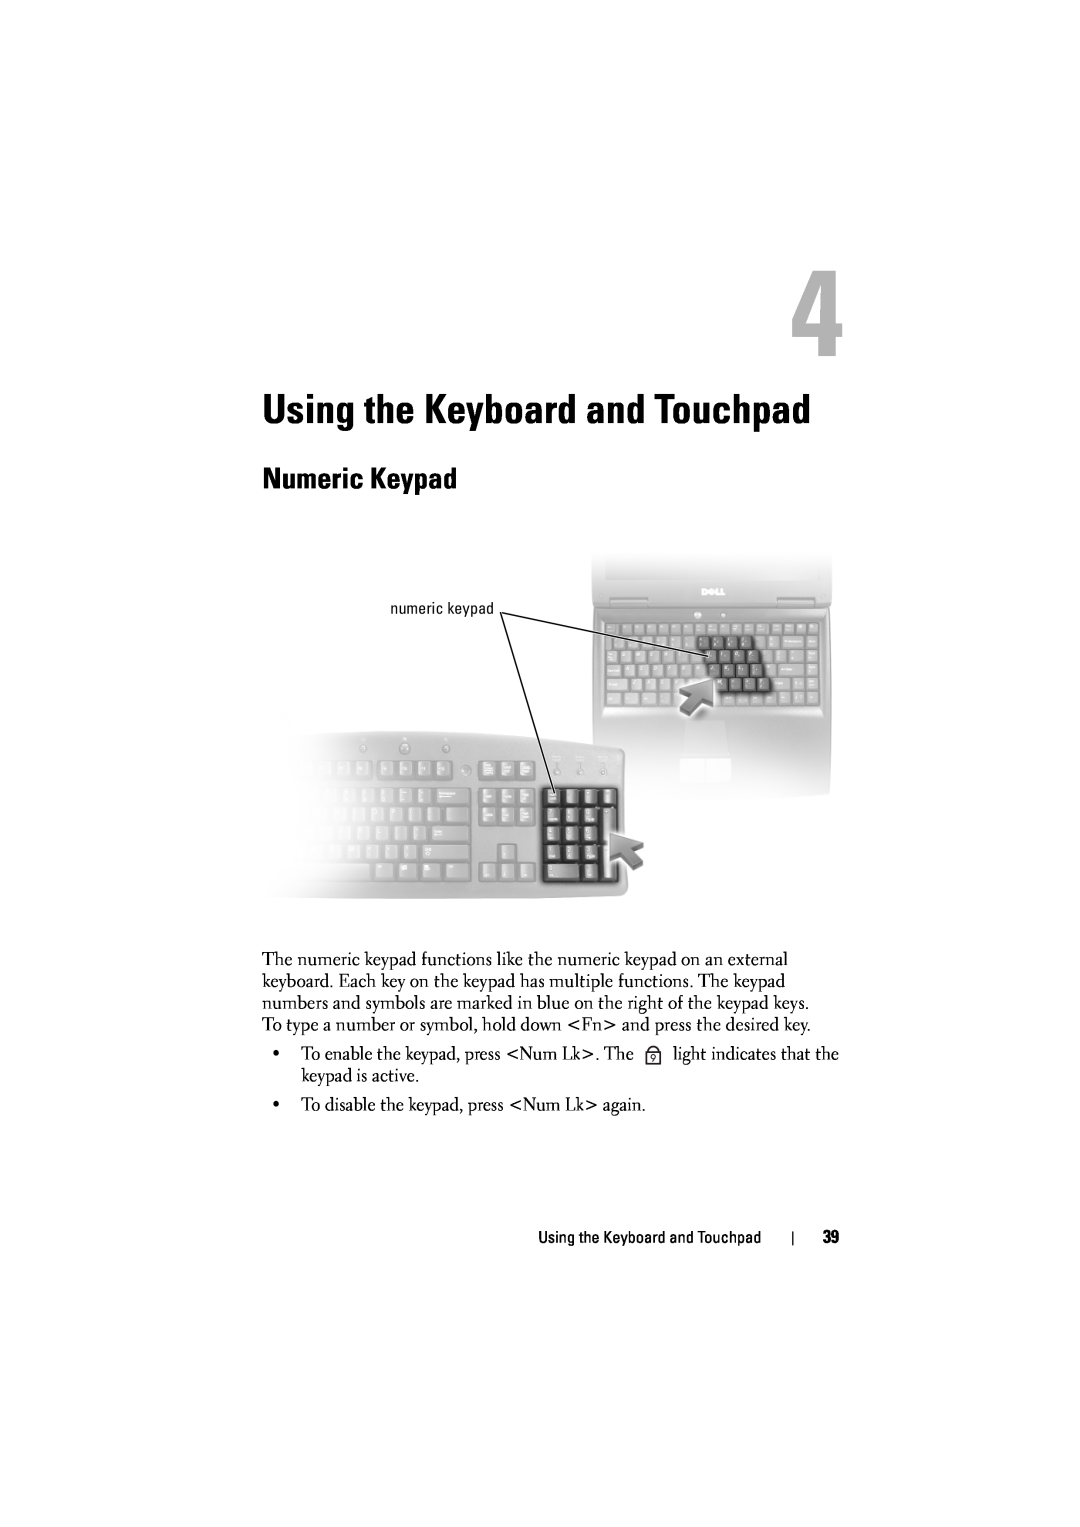 Dell 1526, 1525 owner manual Using the Keyboard and Touchpad, Numeric Keypad 